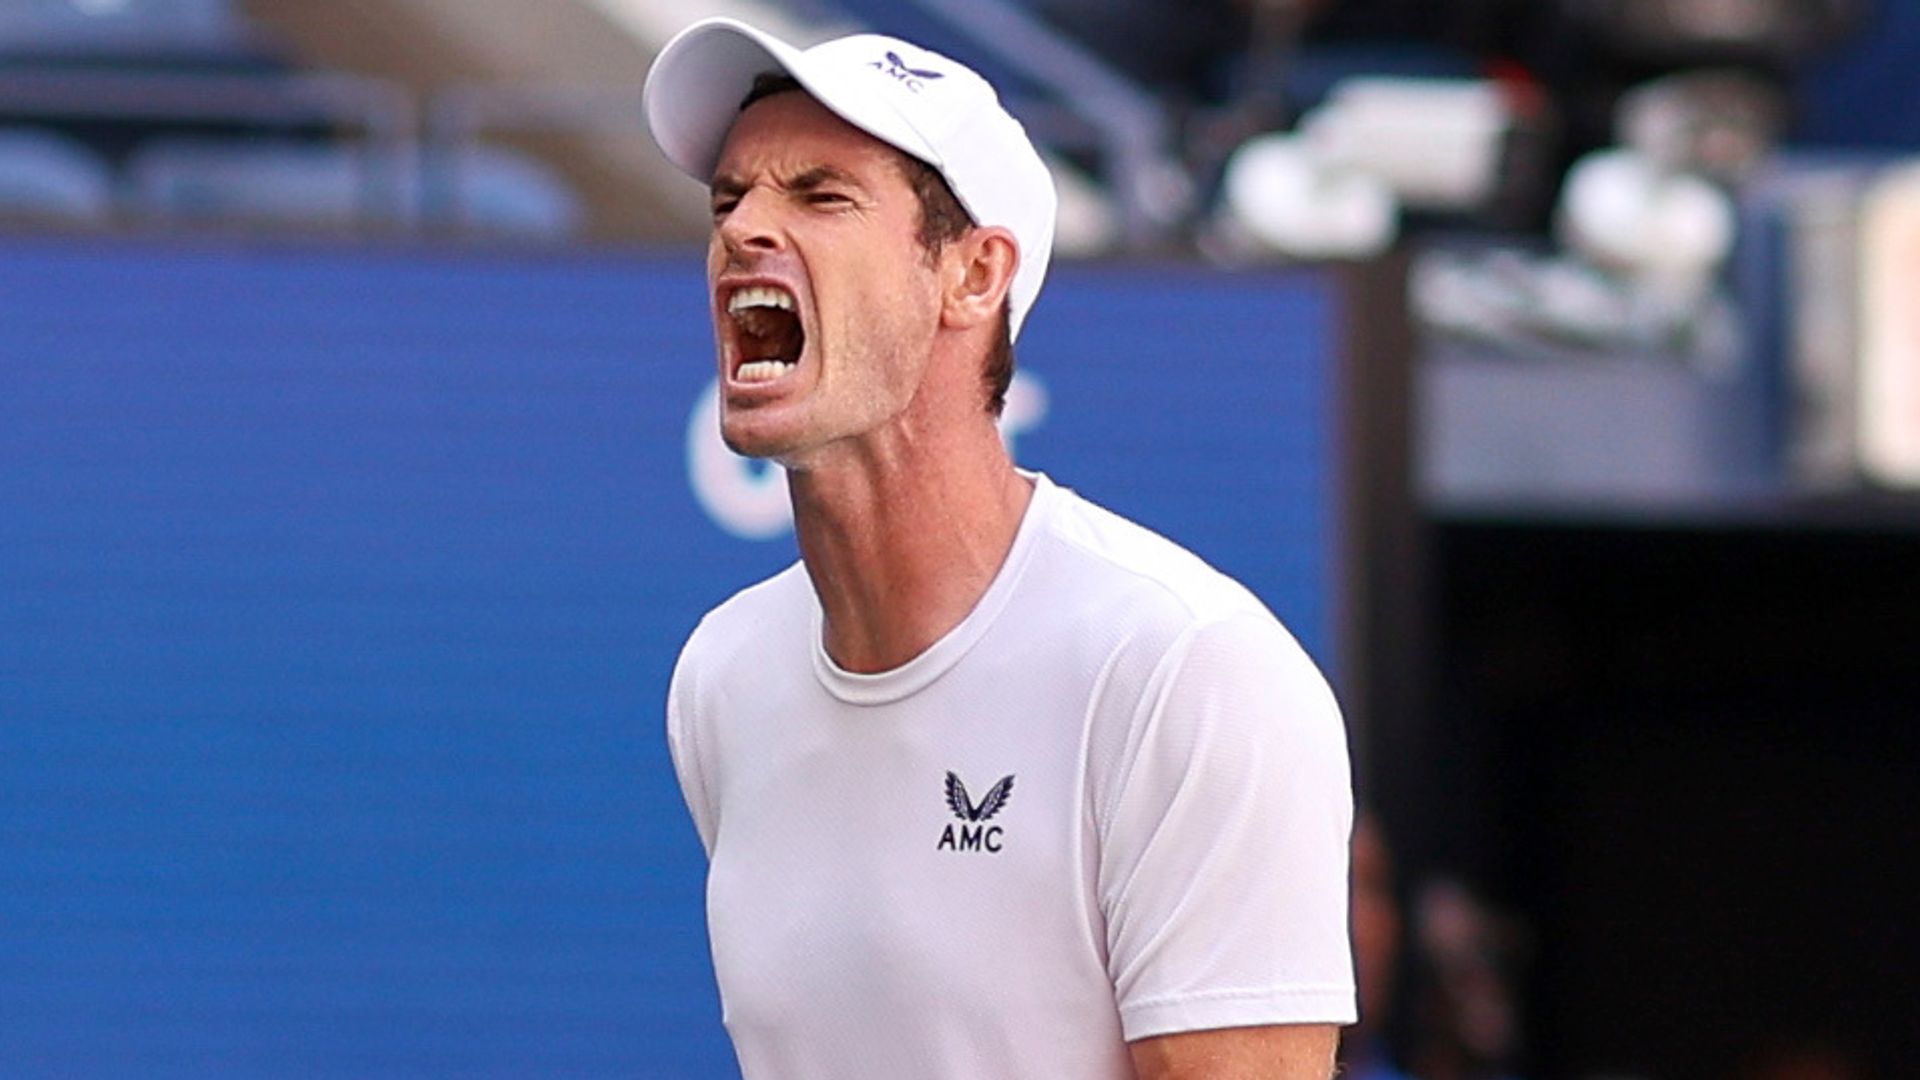 Latest tennis scores: Basel & Vienna with Murray, Norrie both playing